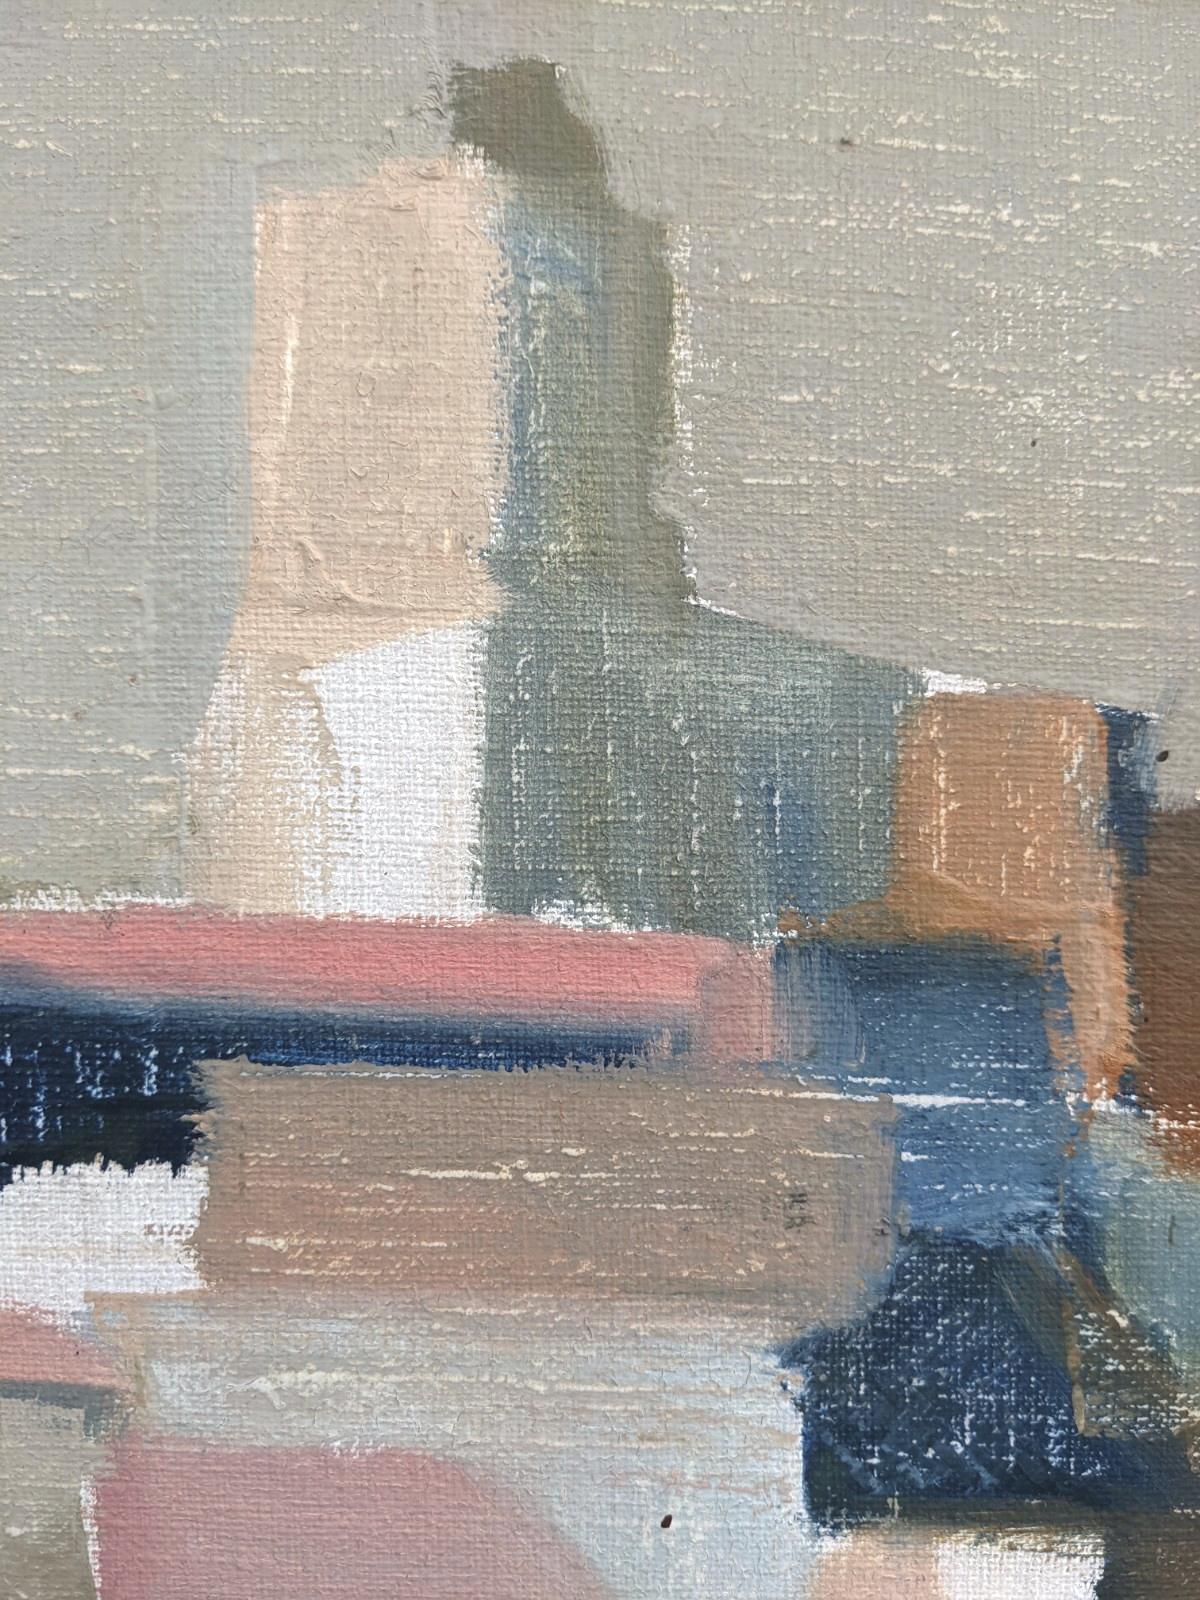 URBANSCAPE
Size: 57 x 49 cm (including frame)
Oil on board

A very well executed mid century townscape painted in oil onto board.

The artist has eliminated all details and has reduced the forms of the buildings down into simple yet very effective